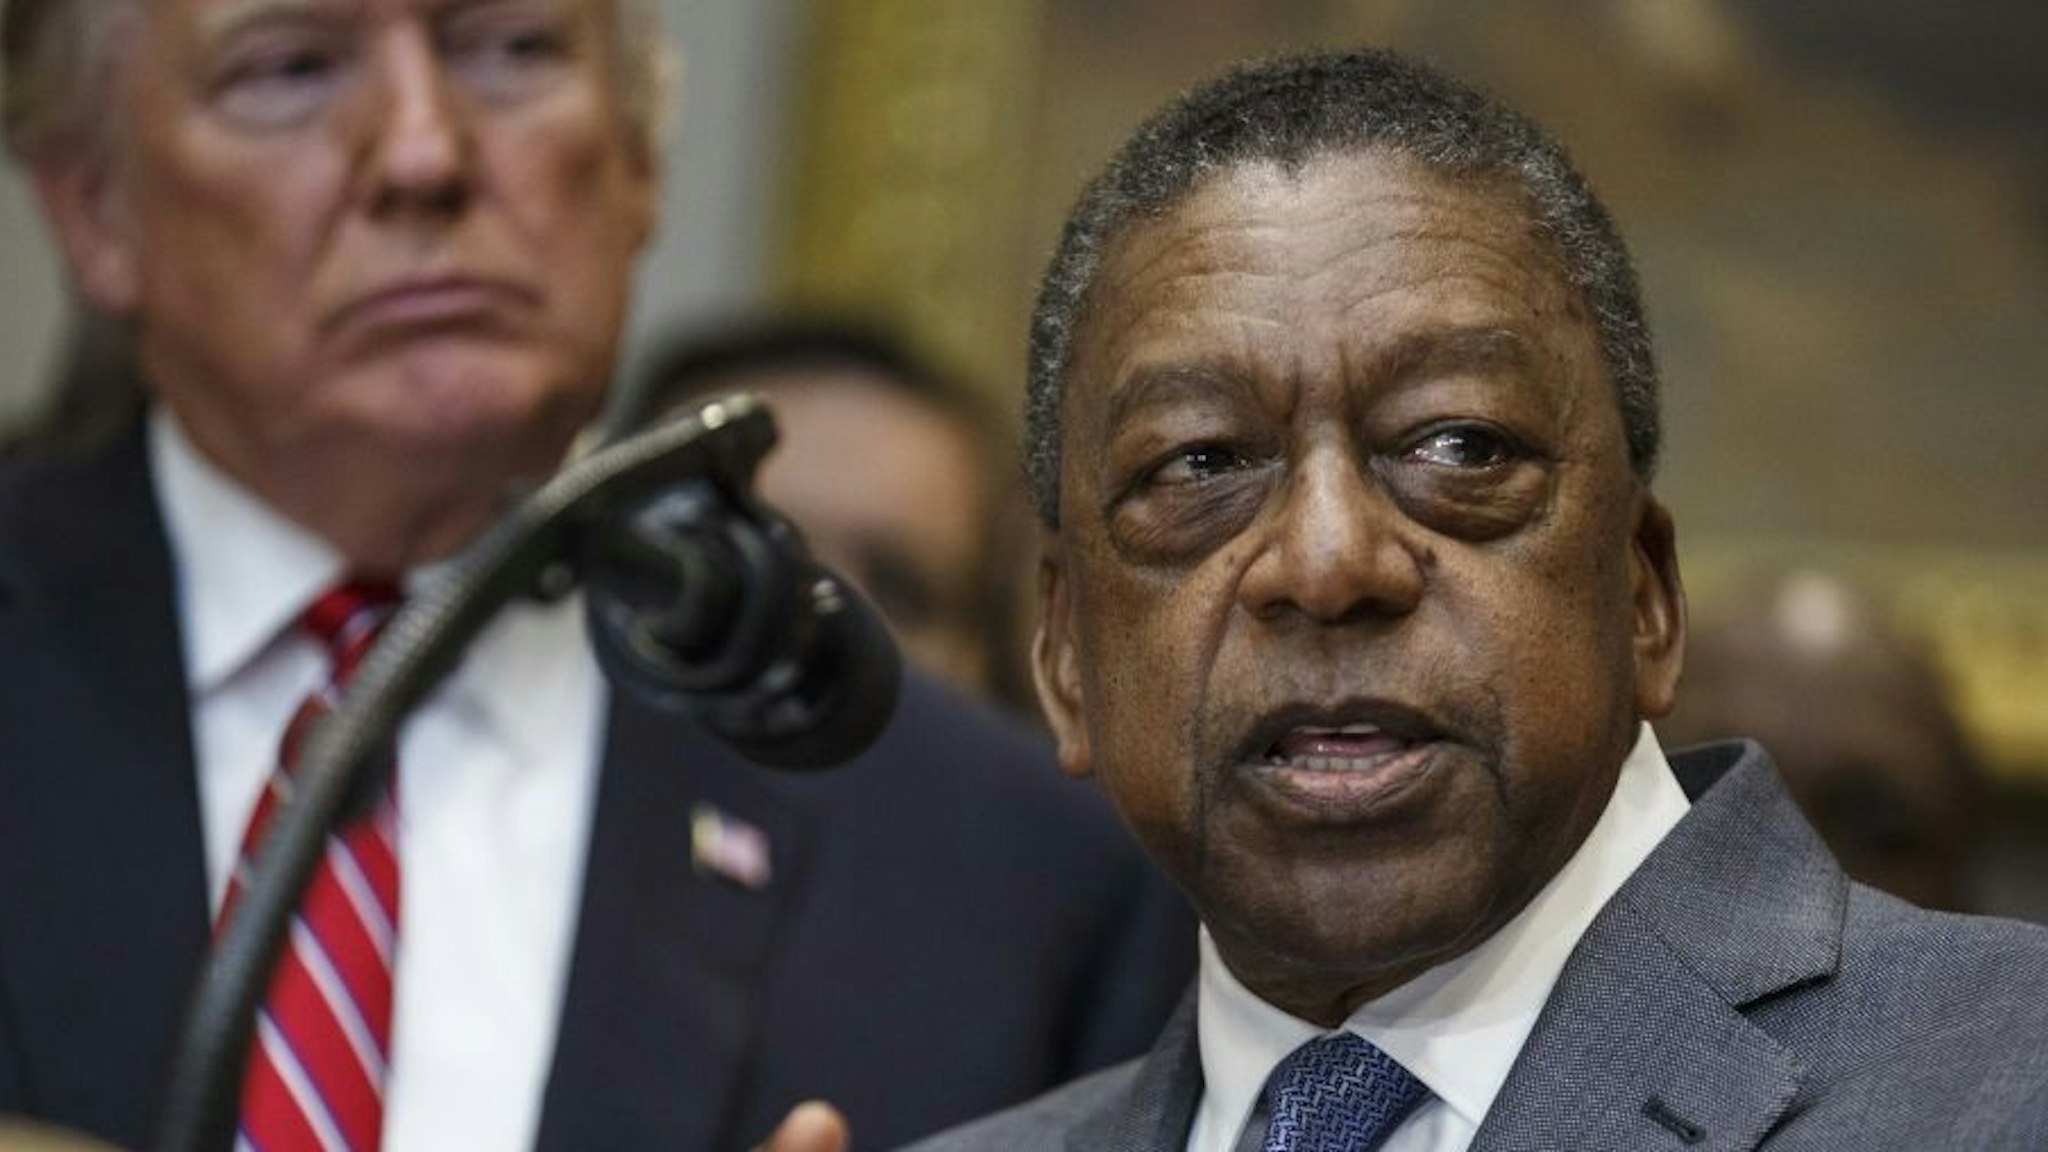 Robert Johnson, founder of Rlj Cos. and co-founder of Black Entertainment Television (BET), speaks during an executive order signing in the Roosevelt Room of the White House in Washington, D.C., U.S., on Wednesday, Dec. 12, 2018. President Donald Trump signed an order to create a White House Opportunity and Revitalization Council, directing federal agencies to steer spending toward certain distressed communities across the country called opportunity zone. Photographer: